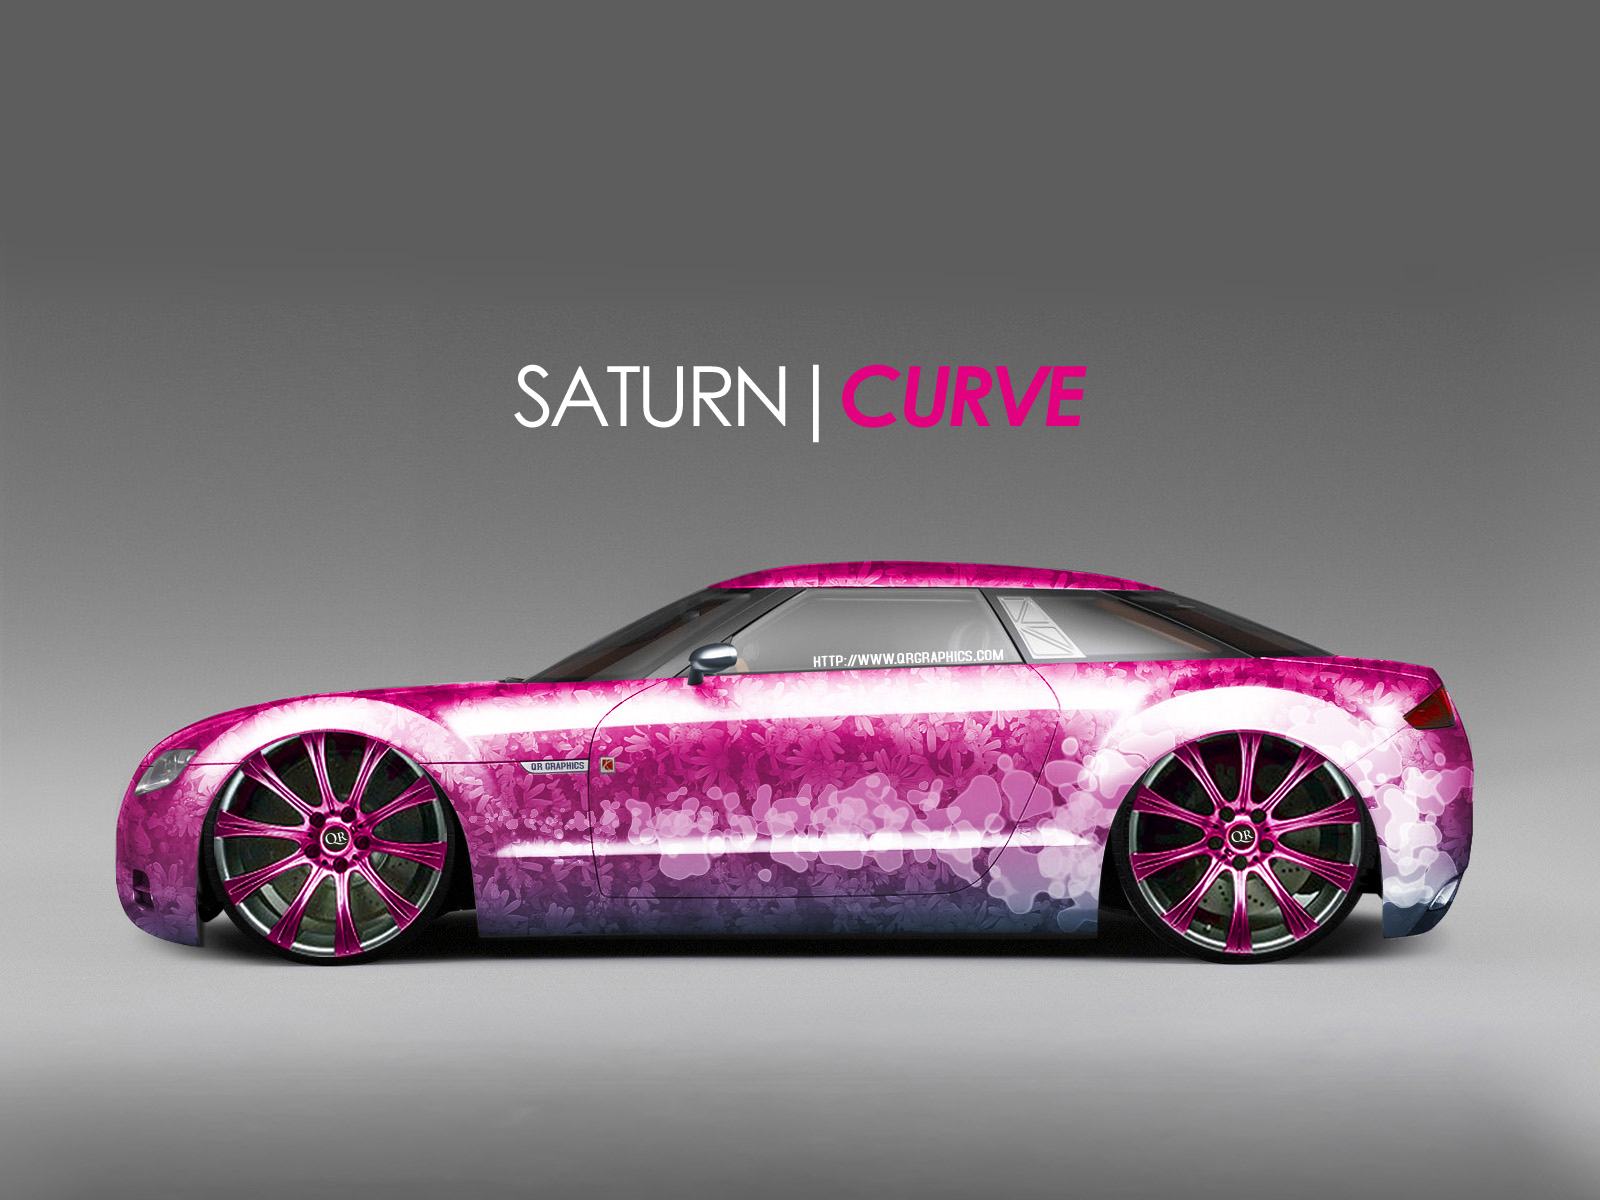 Wallpapers Backgrounds   Saturn Curve Custom Paint Wallpaper 1600x1200